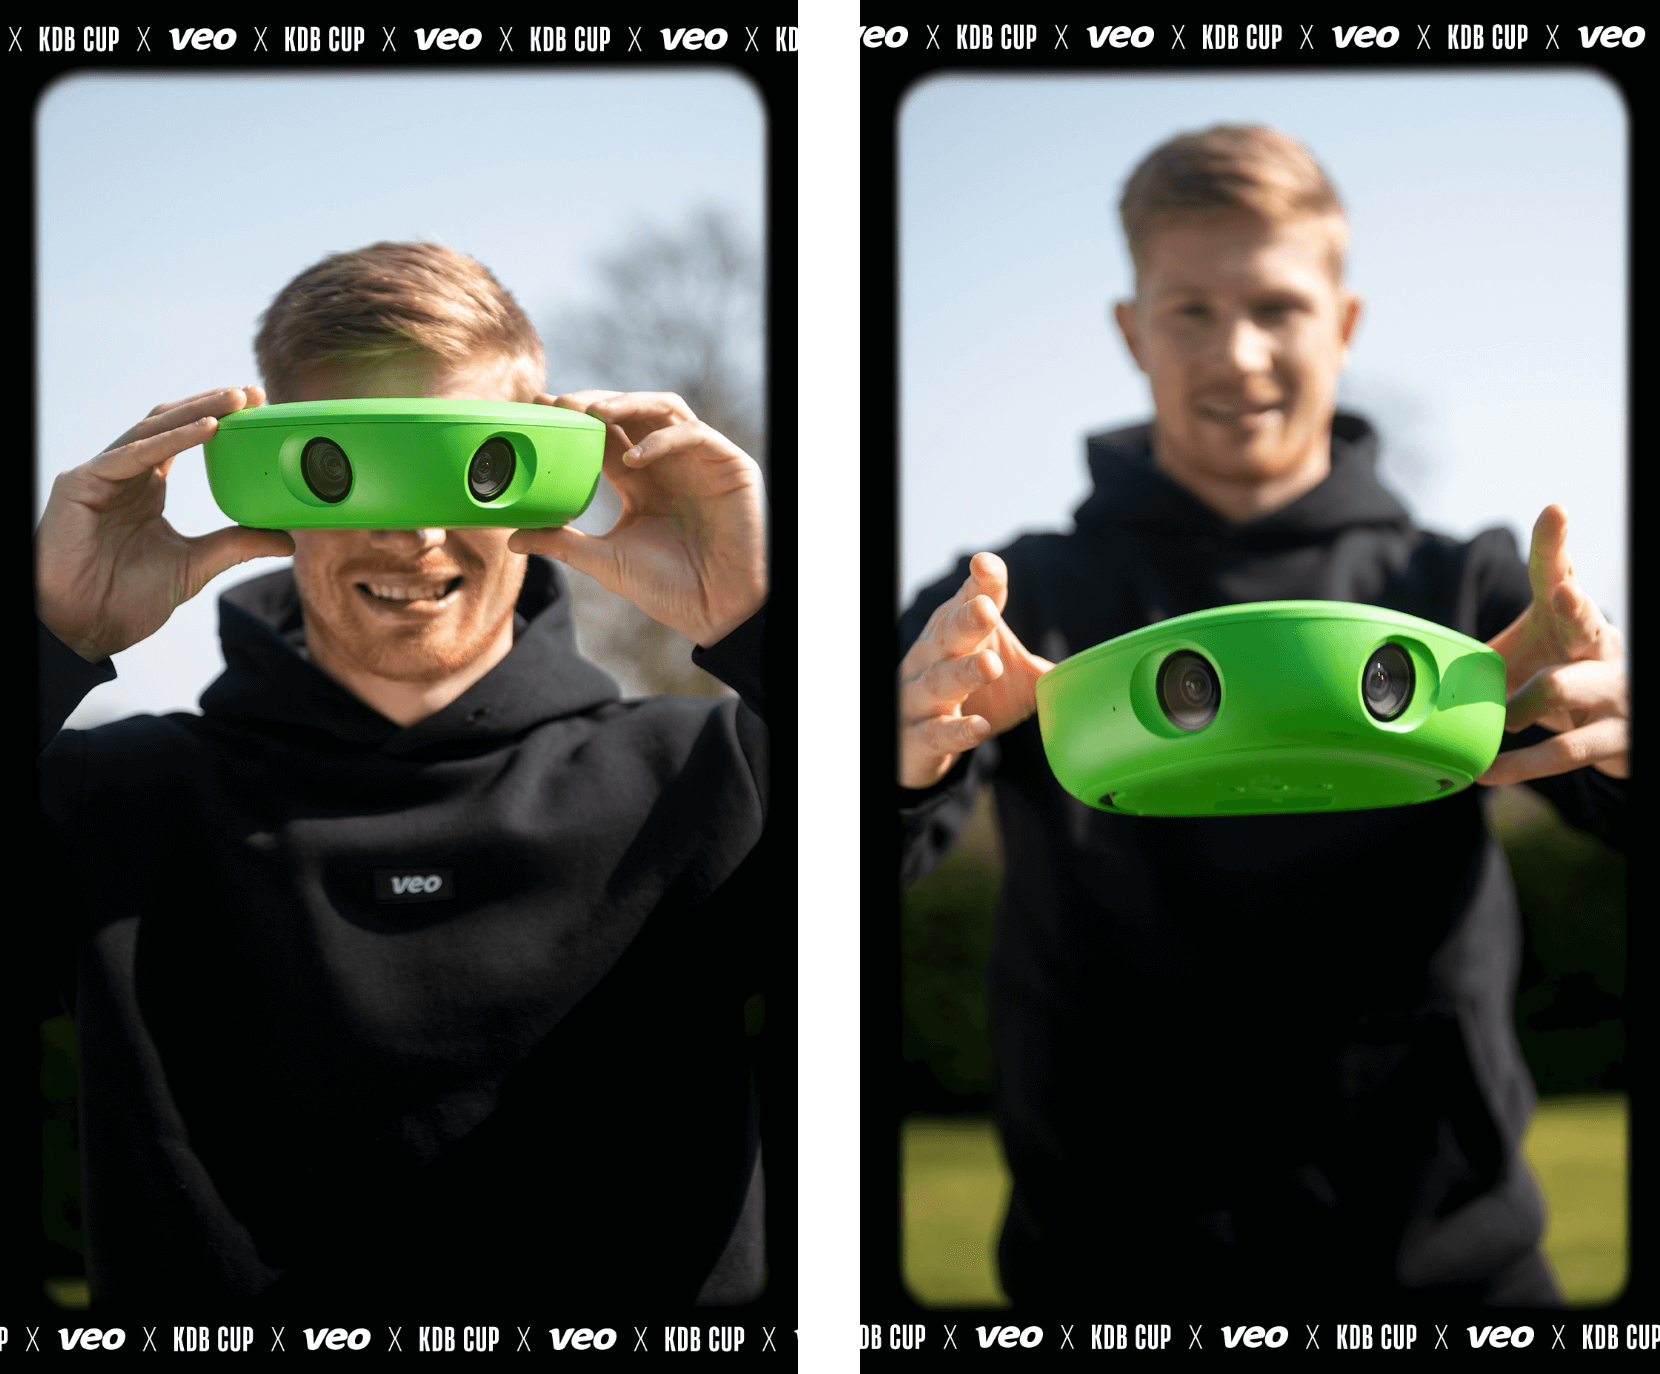 Kevin de Bruyne is happily holding and pointing the Veo soccer camera while dressed in sportswear, enjoying the moment with a big smile on his face.